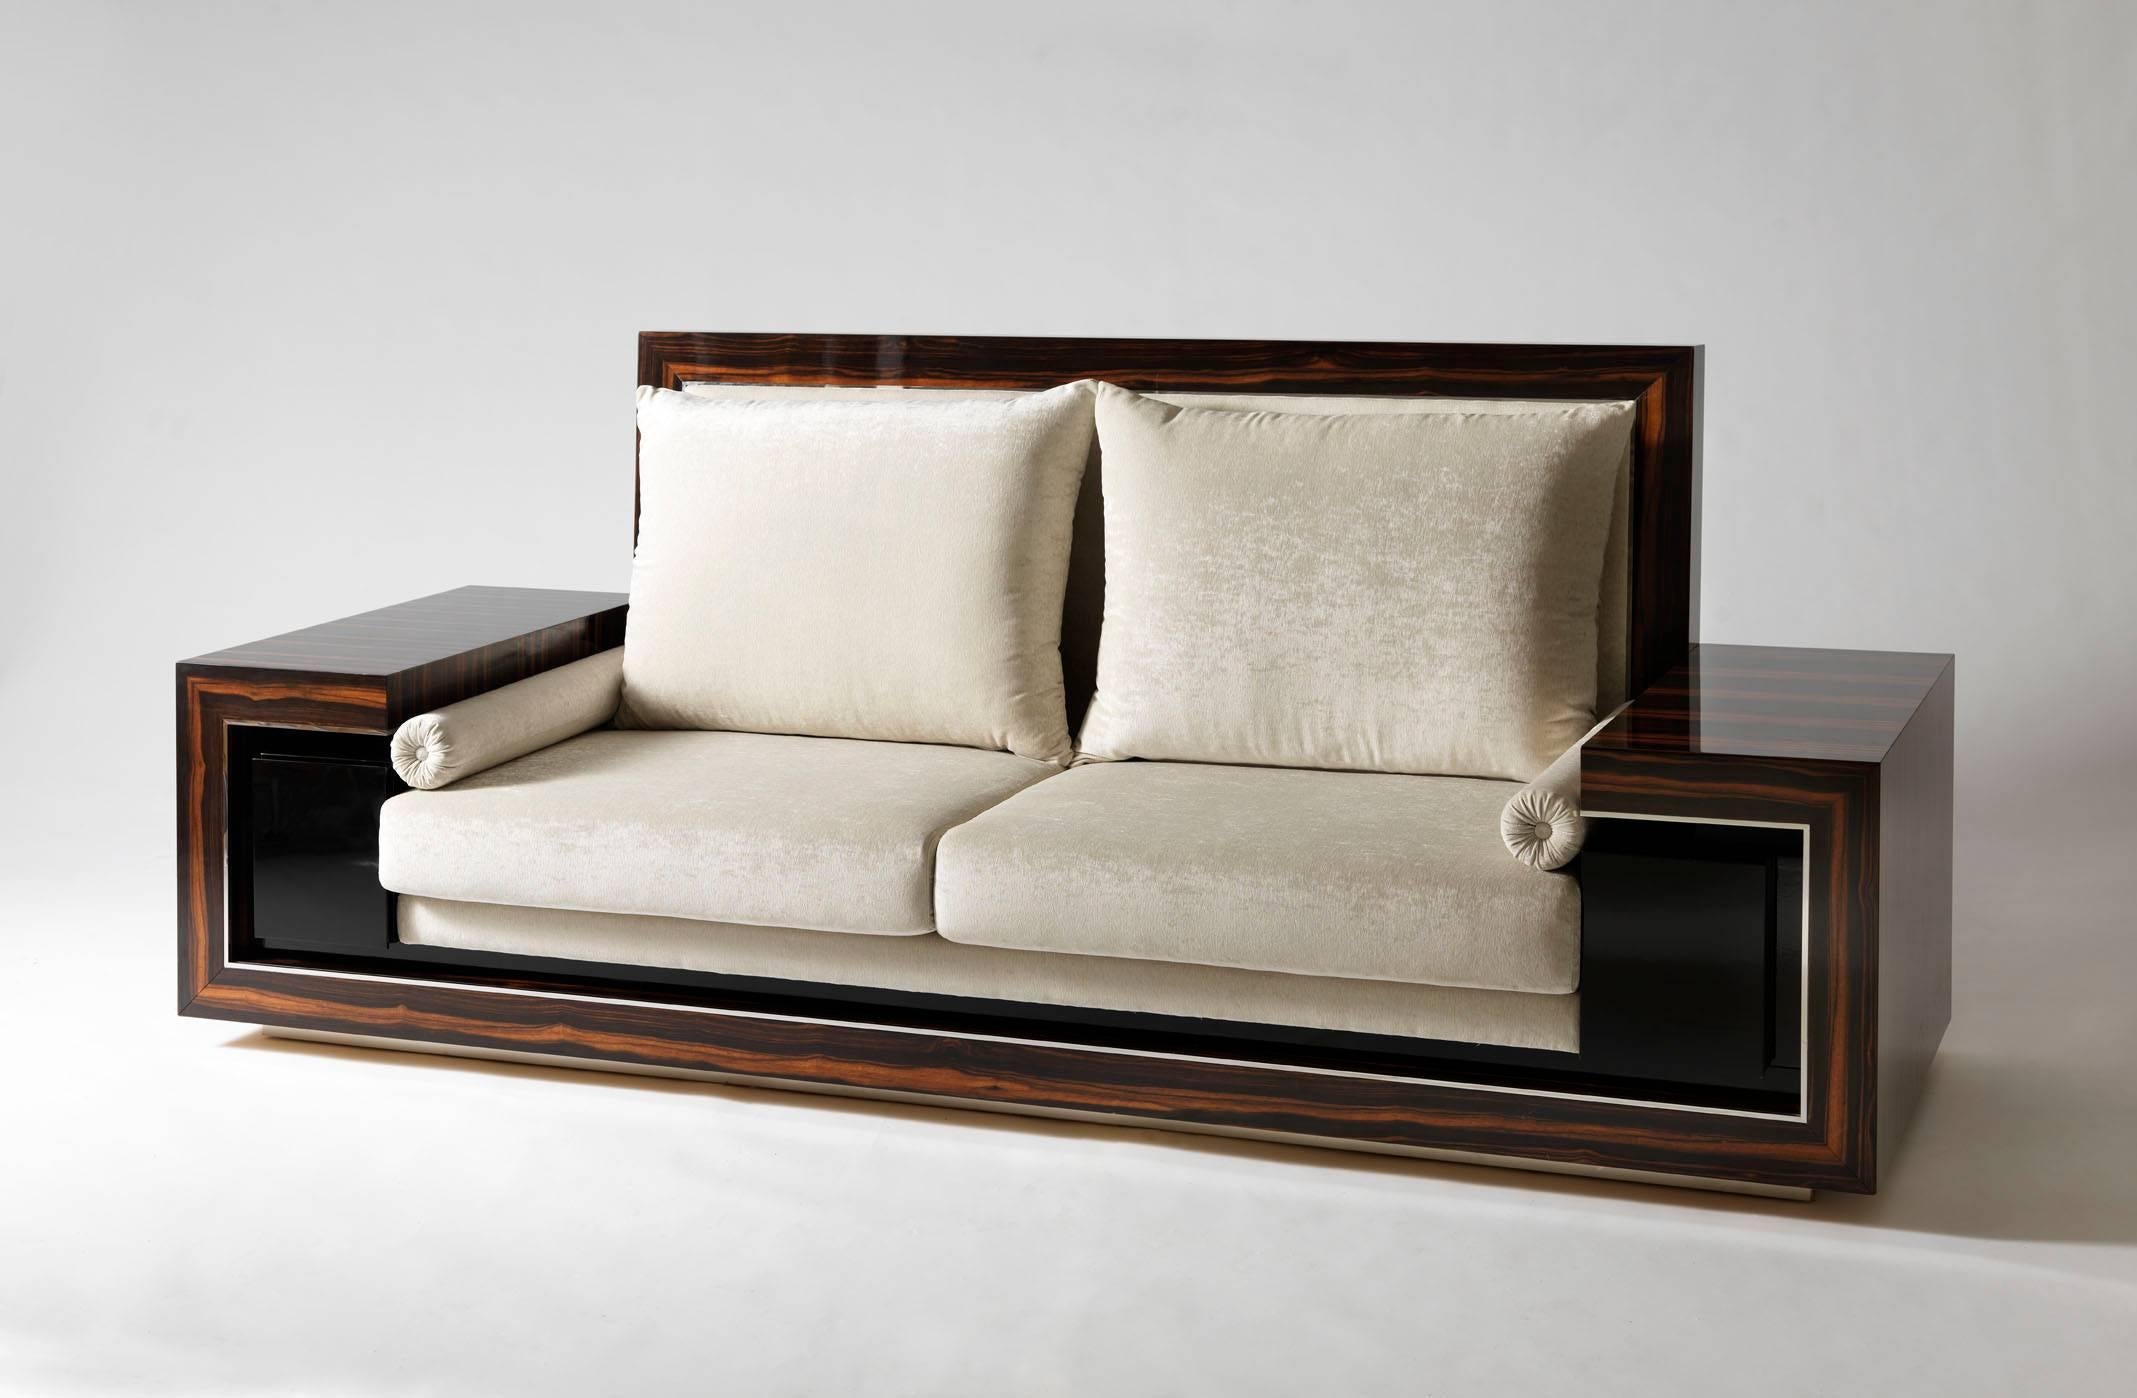 Brushed Macassar Ebony Wood Sofa in Art Deco Style, Handmade in Italy by Master Artisans For Sale